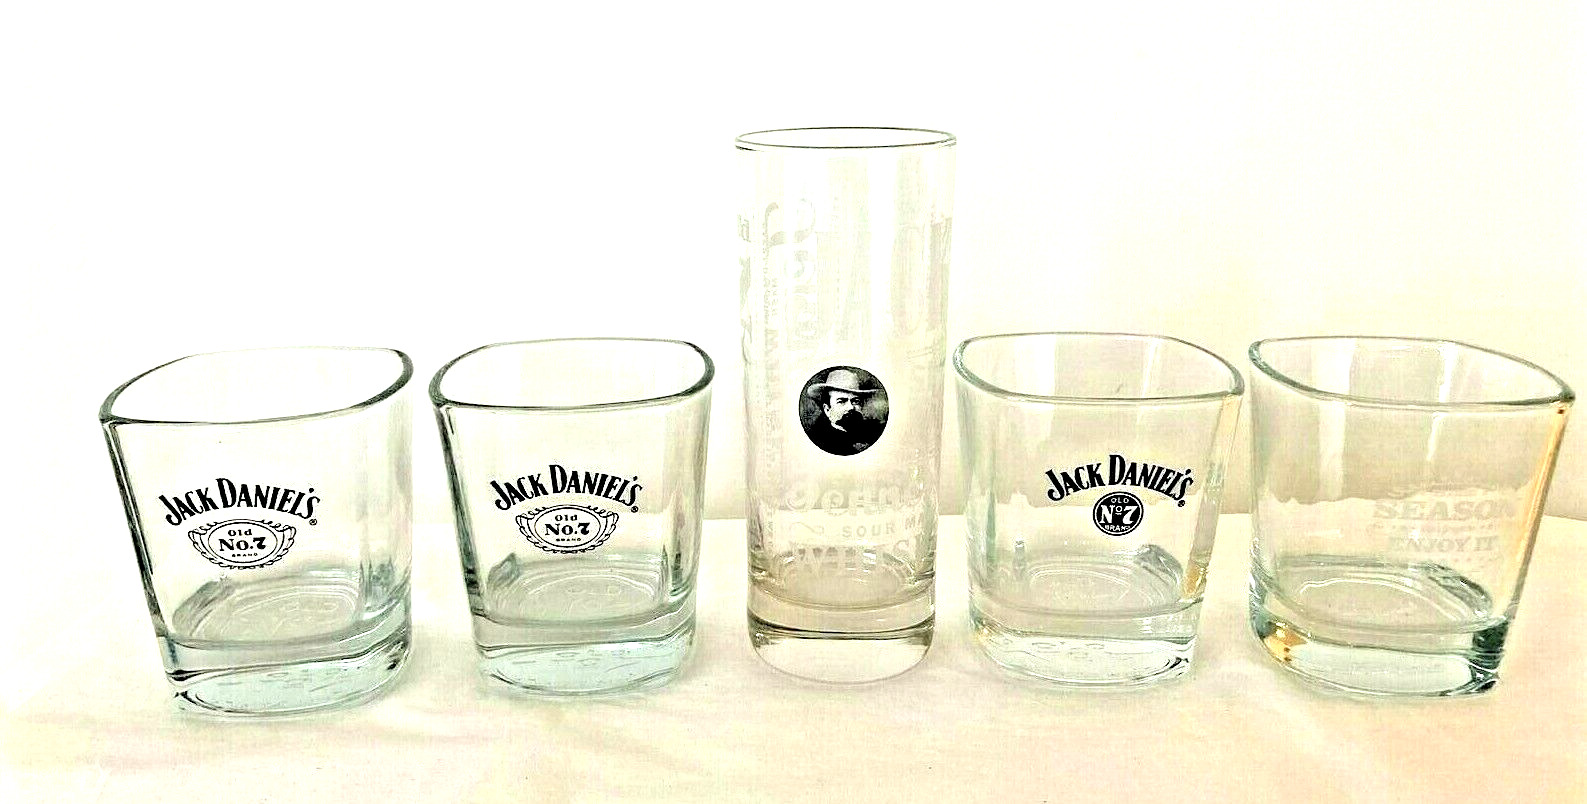 LOT OF 5 VINTAGE JACK DANIELS WHISKEY GLASSES SQUARE AND ROUND HEAVY BOTTOM RARE